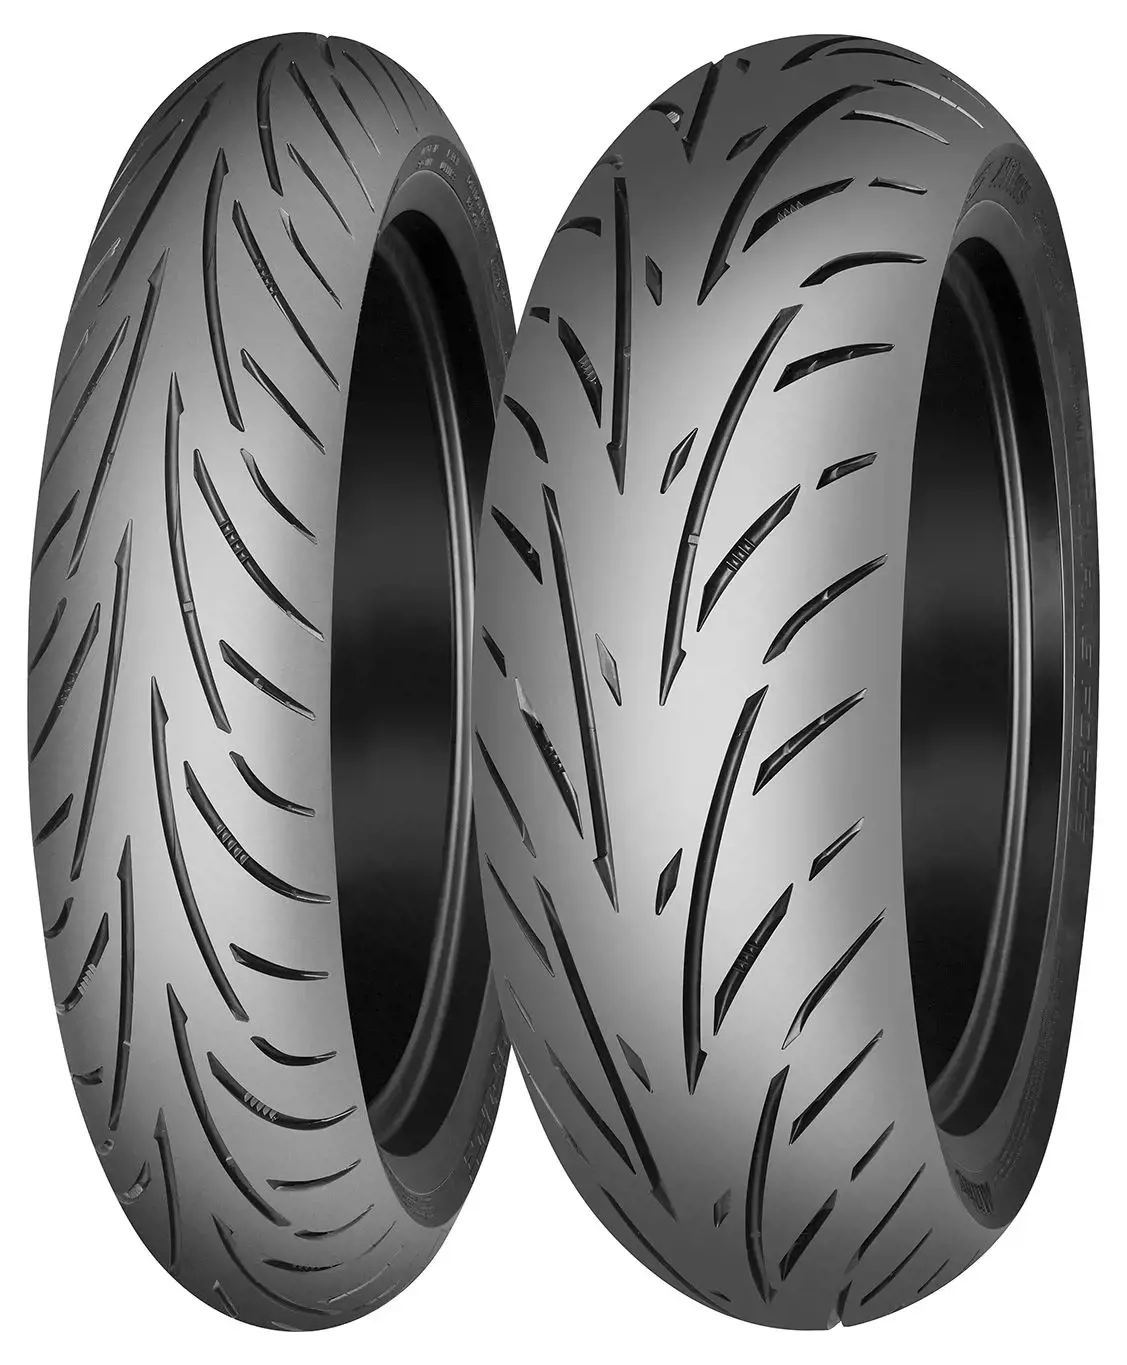 160/60 R15 67V Touring Force Rear